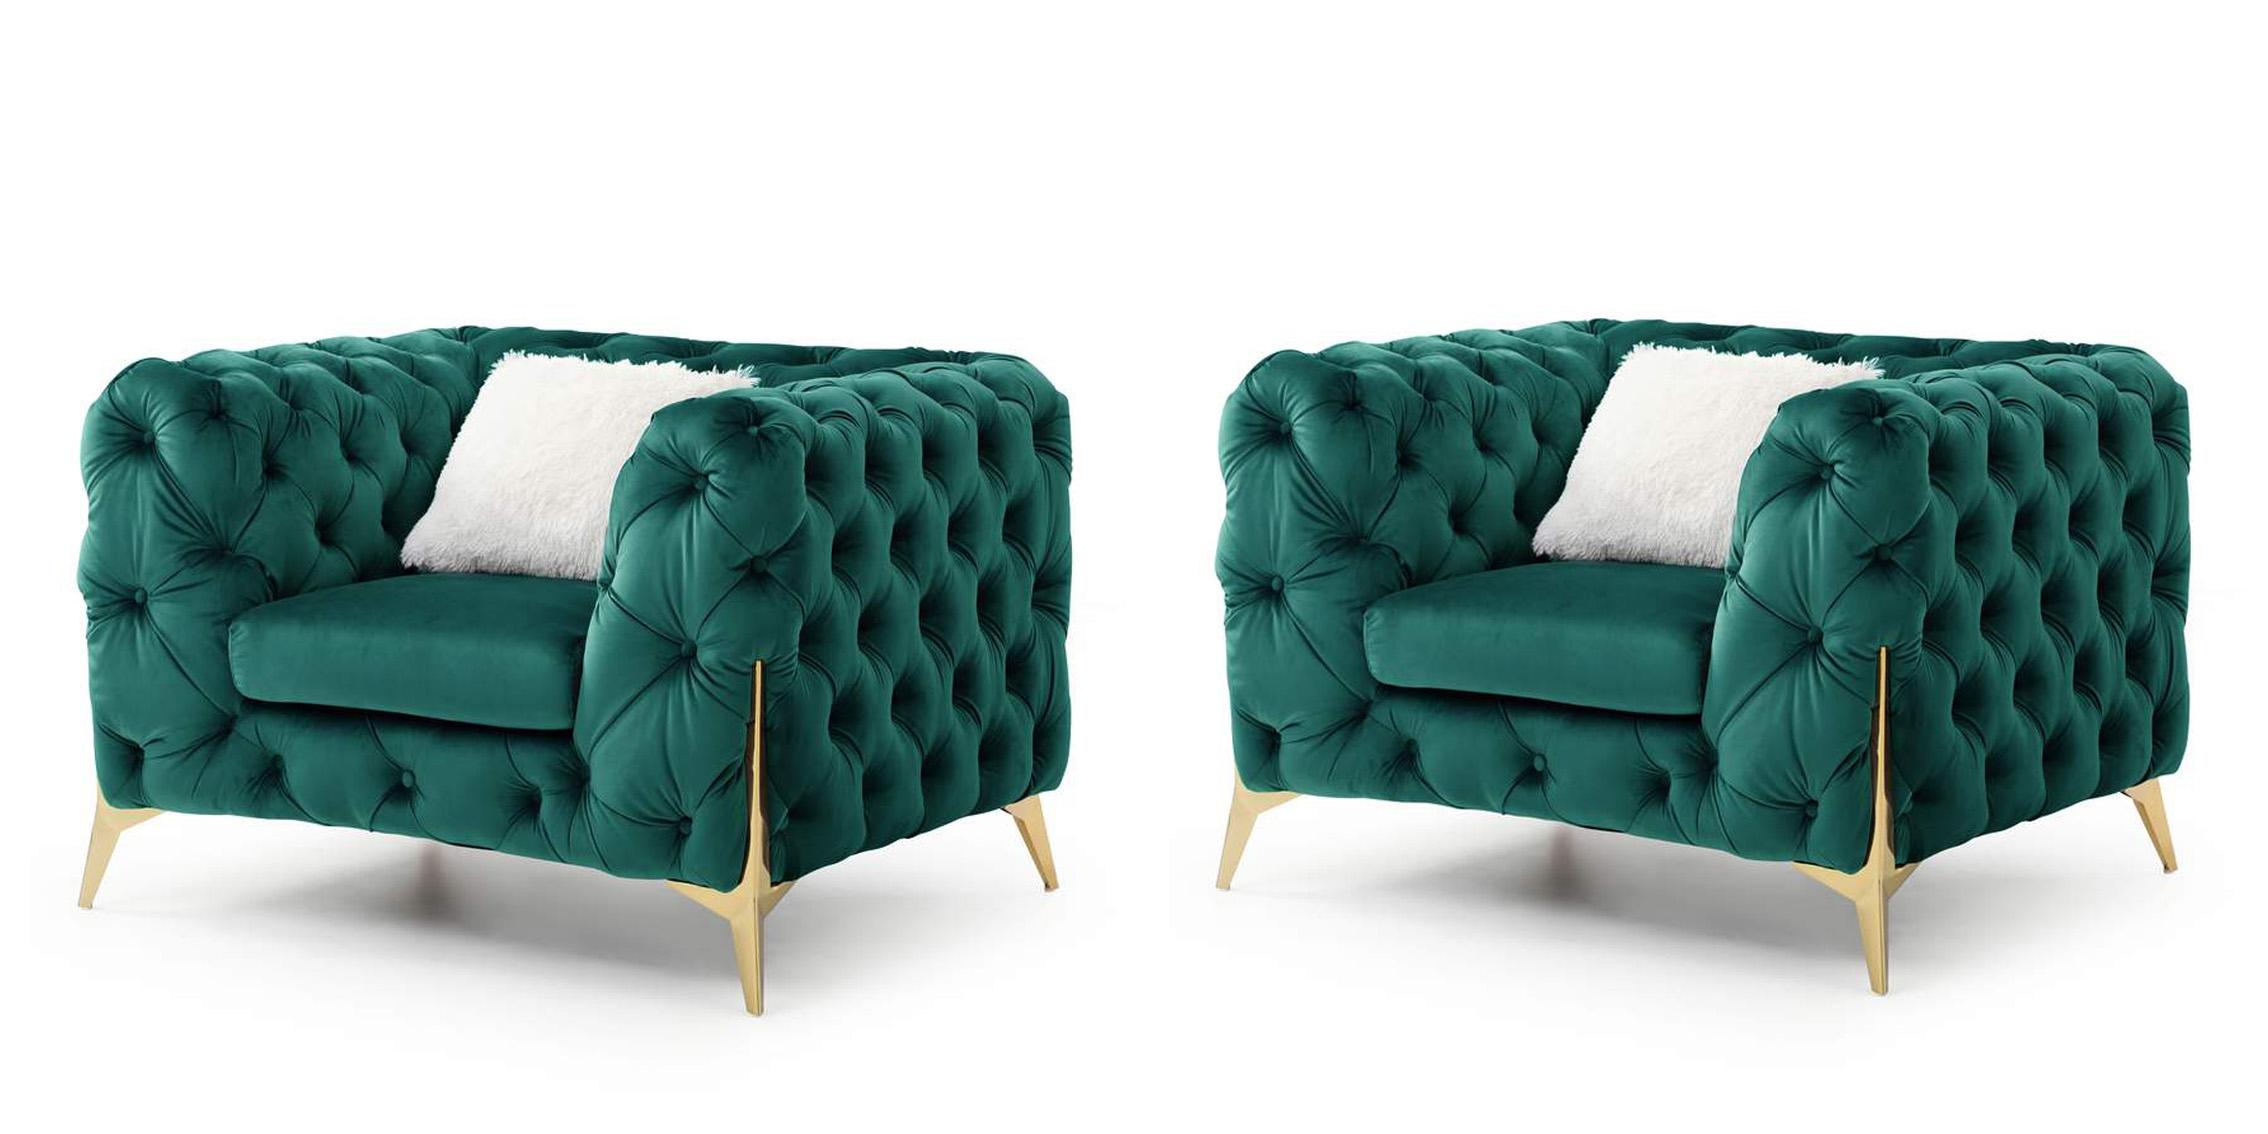 Contemporary, Modern Arm Chair Set MODERNO 808857637598-2PC in Green Fabric